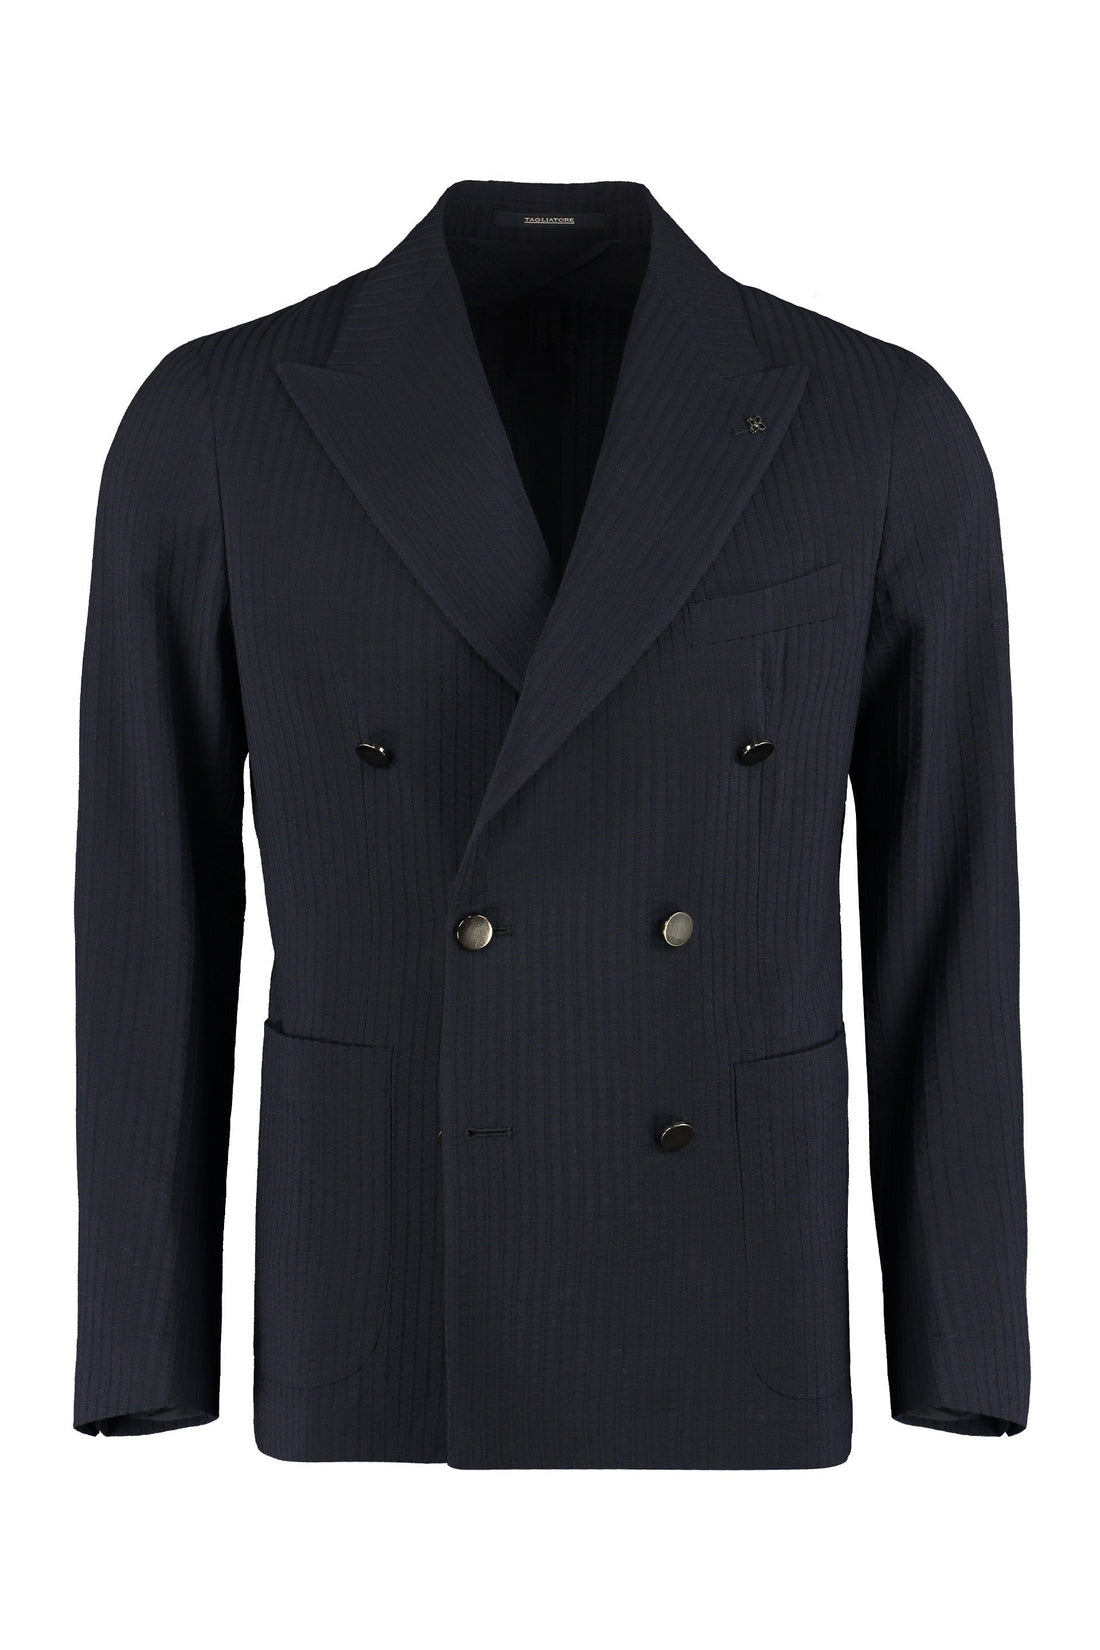 Tagliatore-OUTLET-SALE-Double-breasted virgin wool jacket-ARCHIVIST